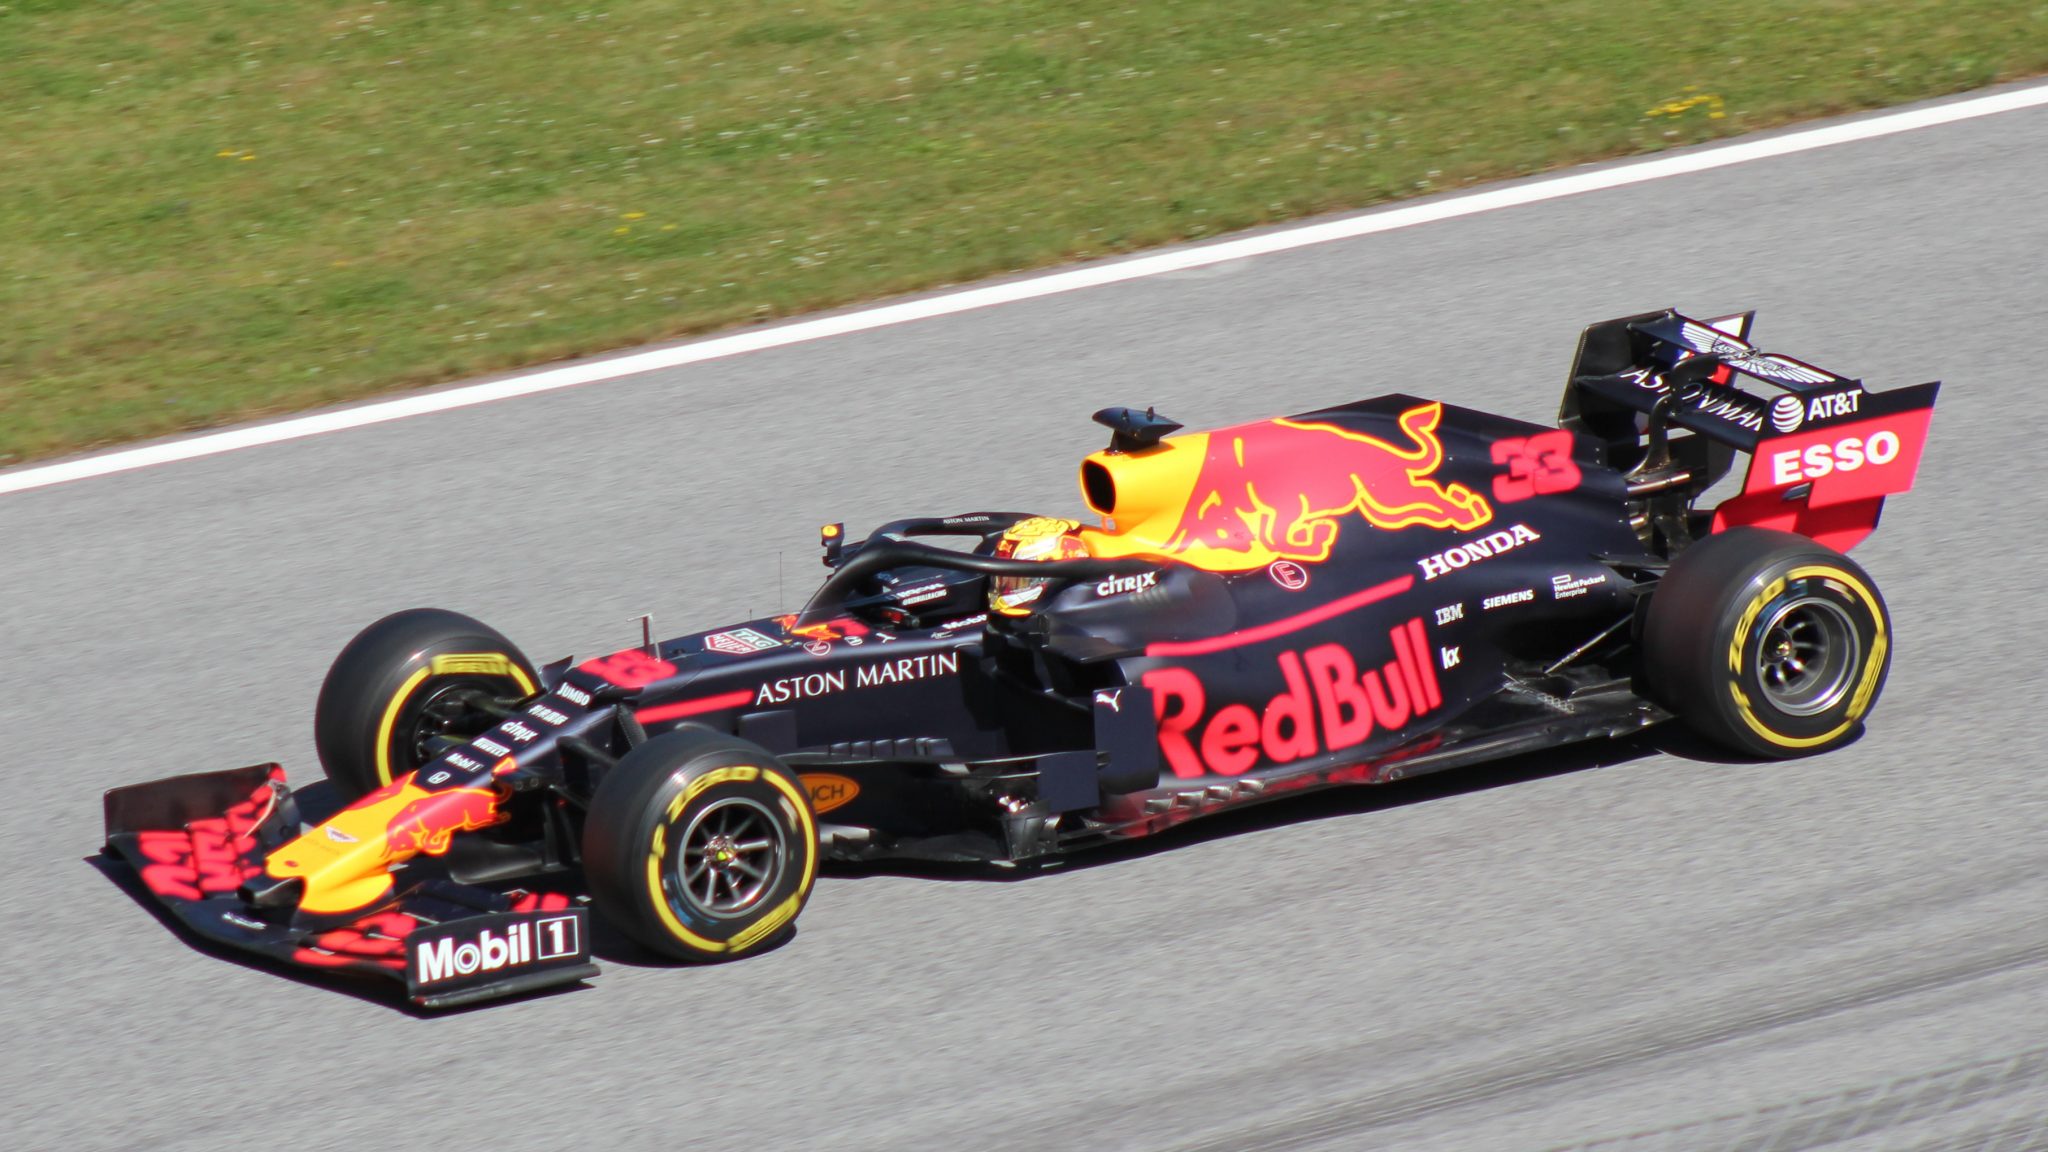 Red Bull after Austrian F1 broadcast rights, claims report - Digital TV ...